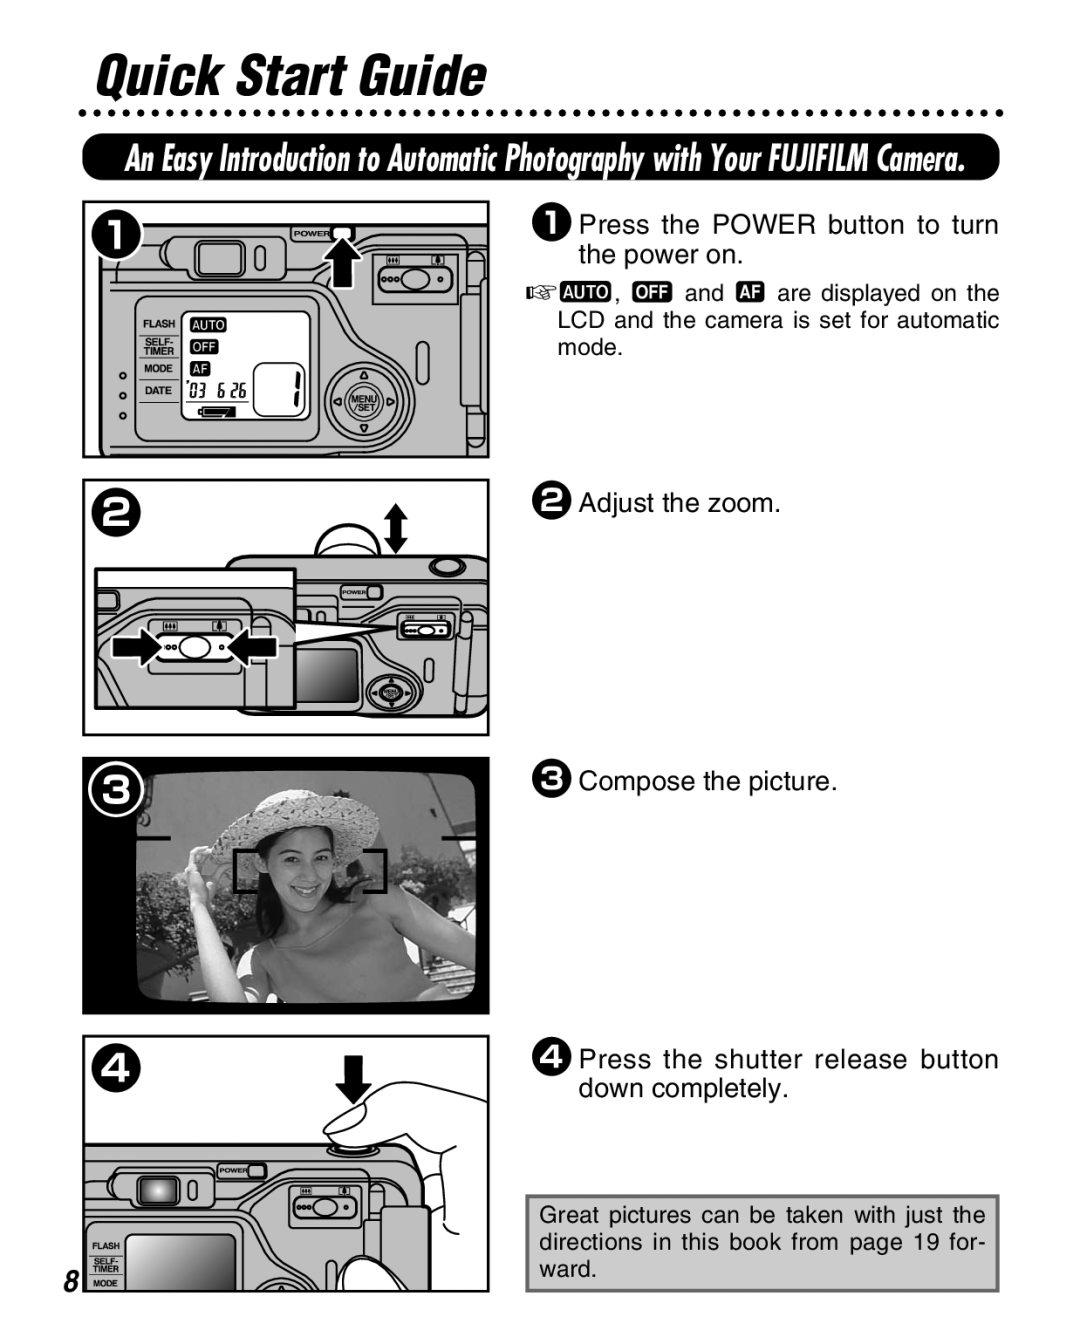 FujiFilm Zoom Date 160ez owner manual Quick Start Guide, 1Press the POWER button to turn the power on 